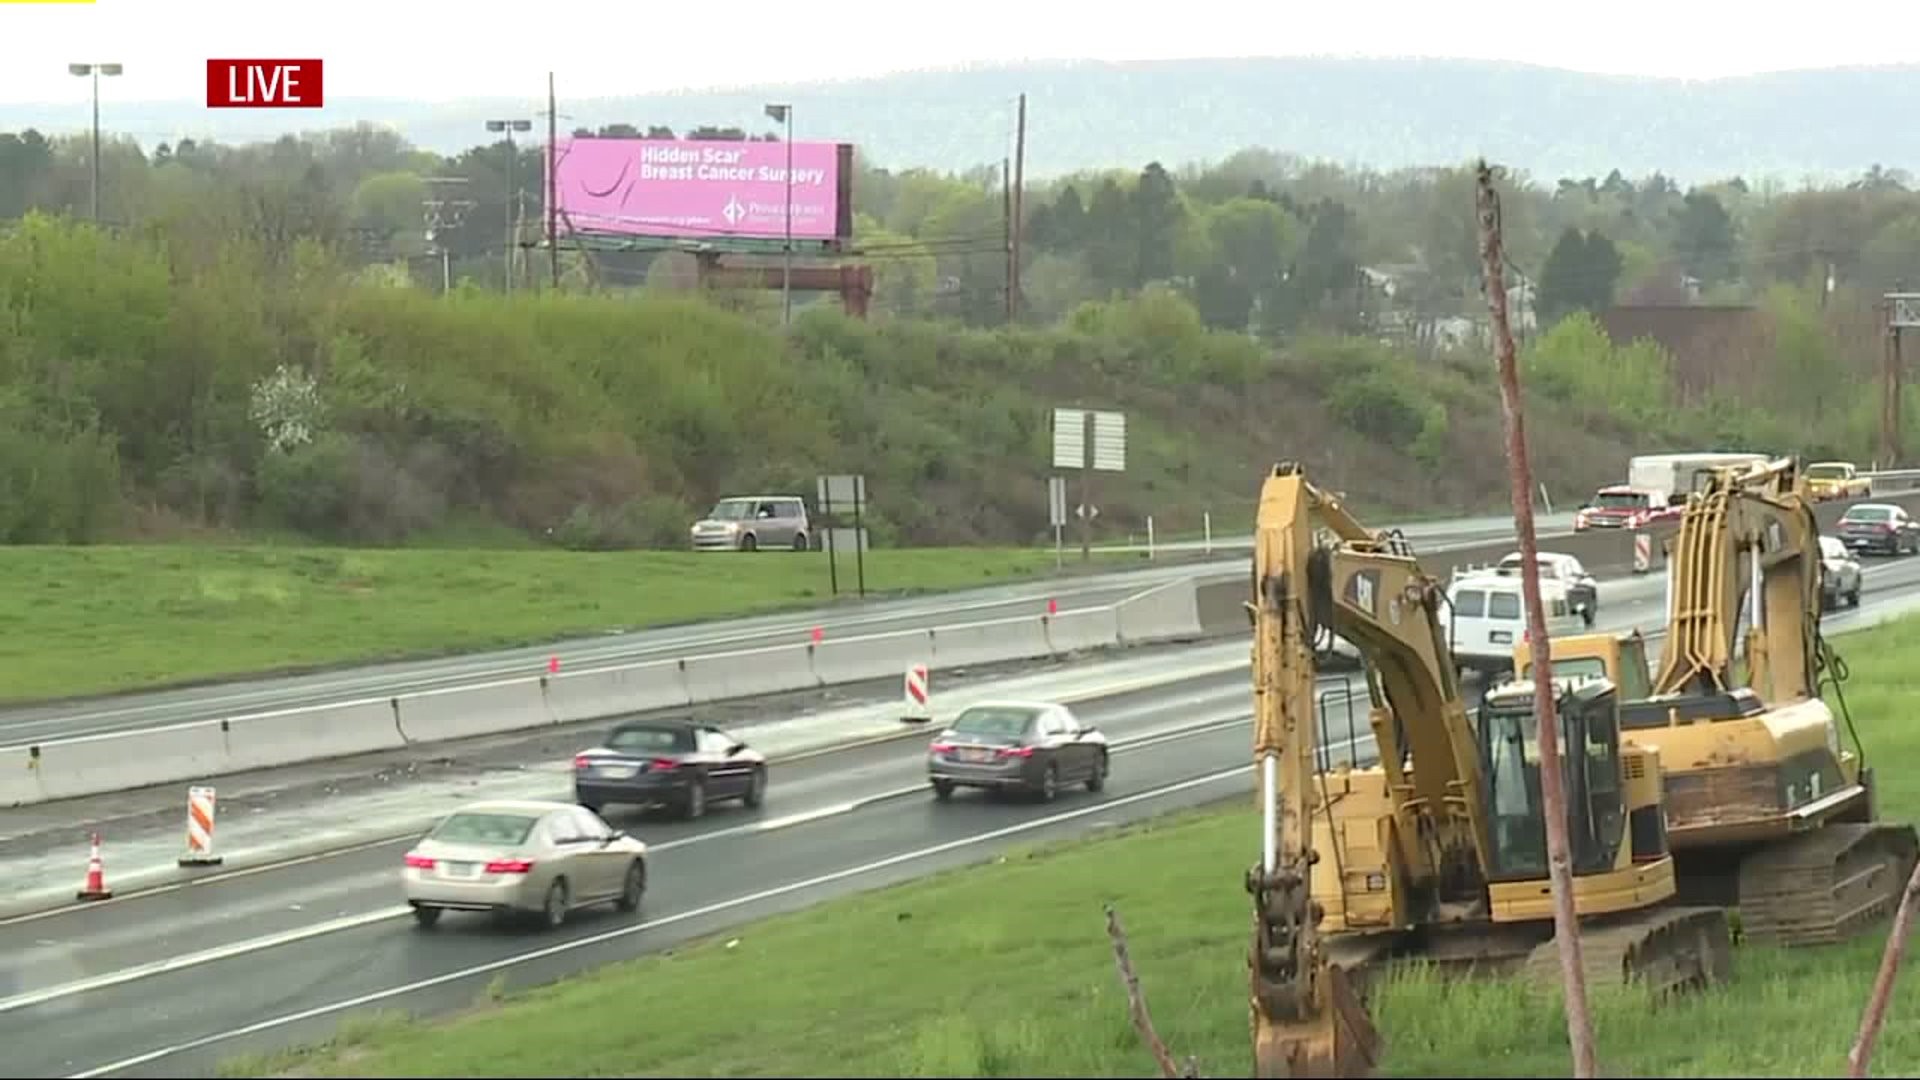 Crash on Interstate 83 closes left lanes in both directions, expected to cause heavy delays